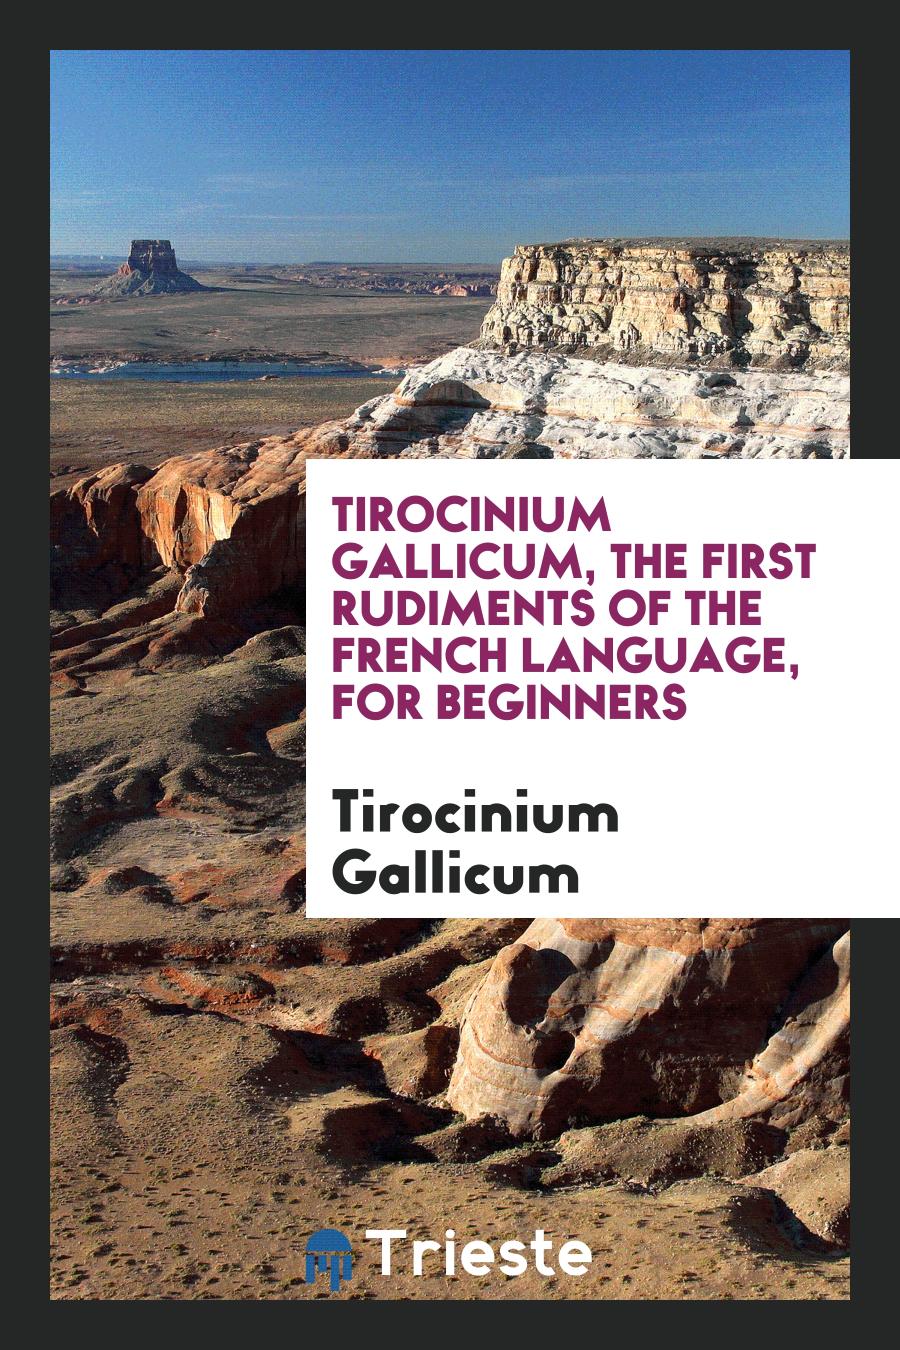 Tirocinium Gallicum, the first rudiments of the French language, for beginners